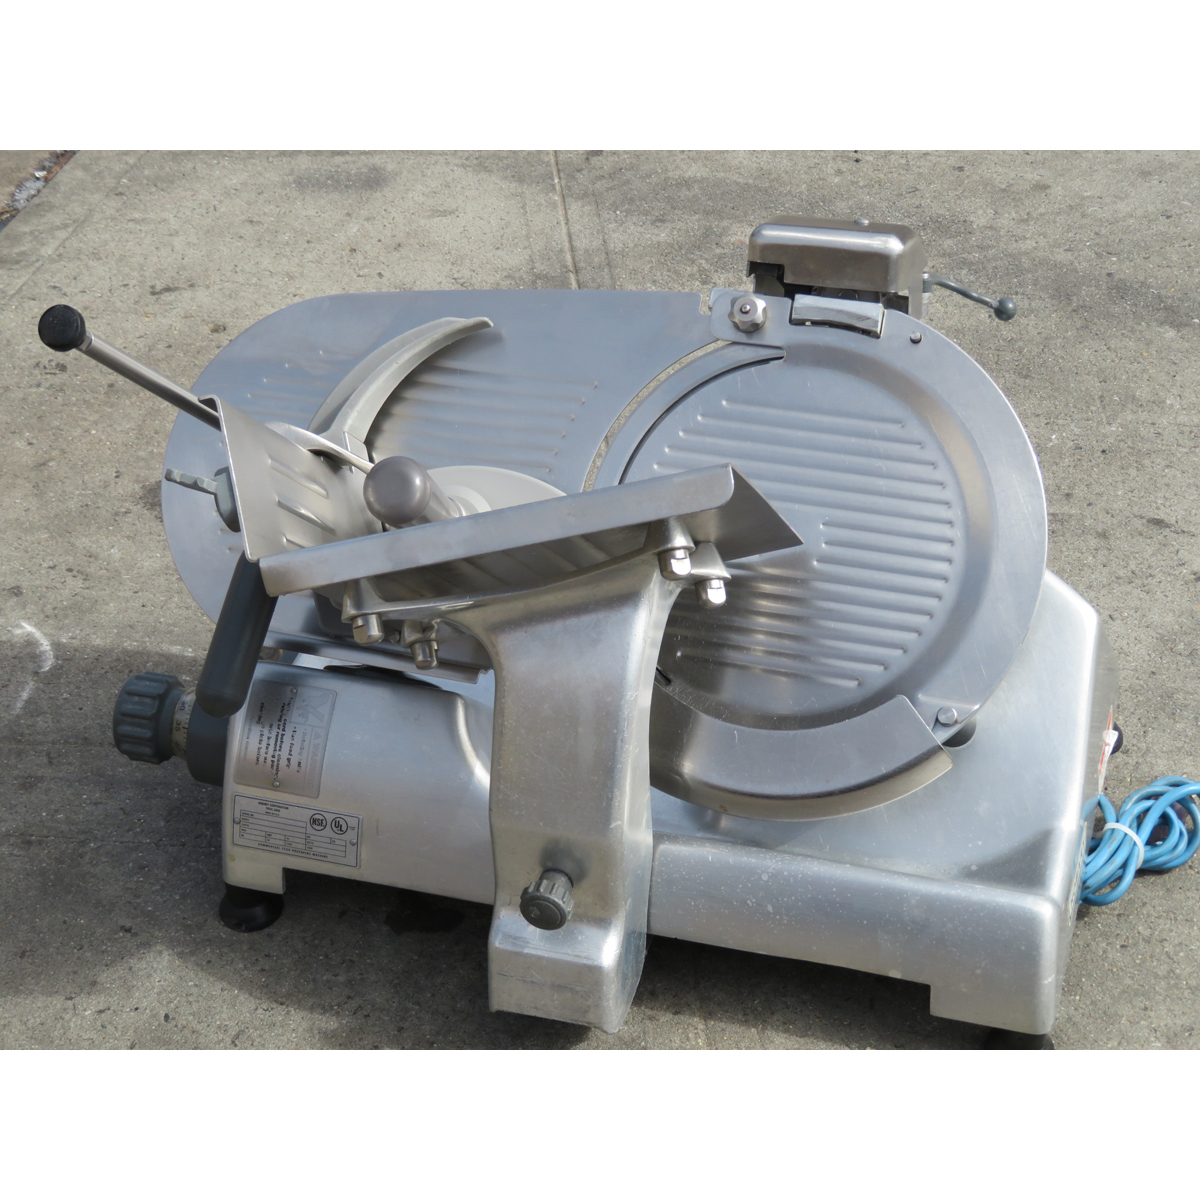 Hobart 2612 Meat Slicer, Used Great Condition image 1